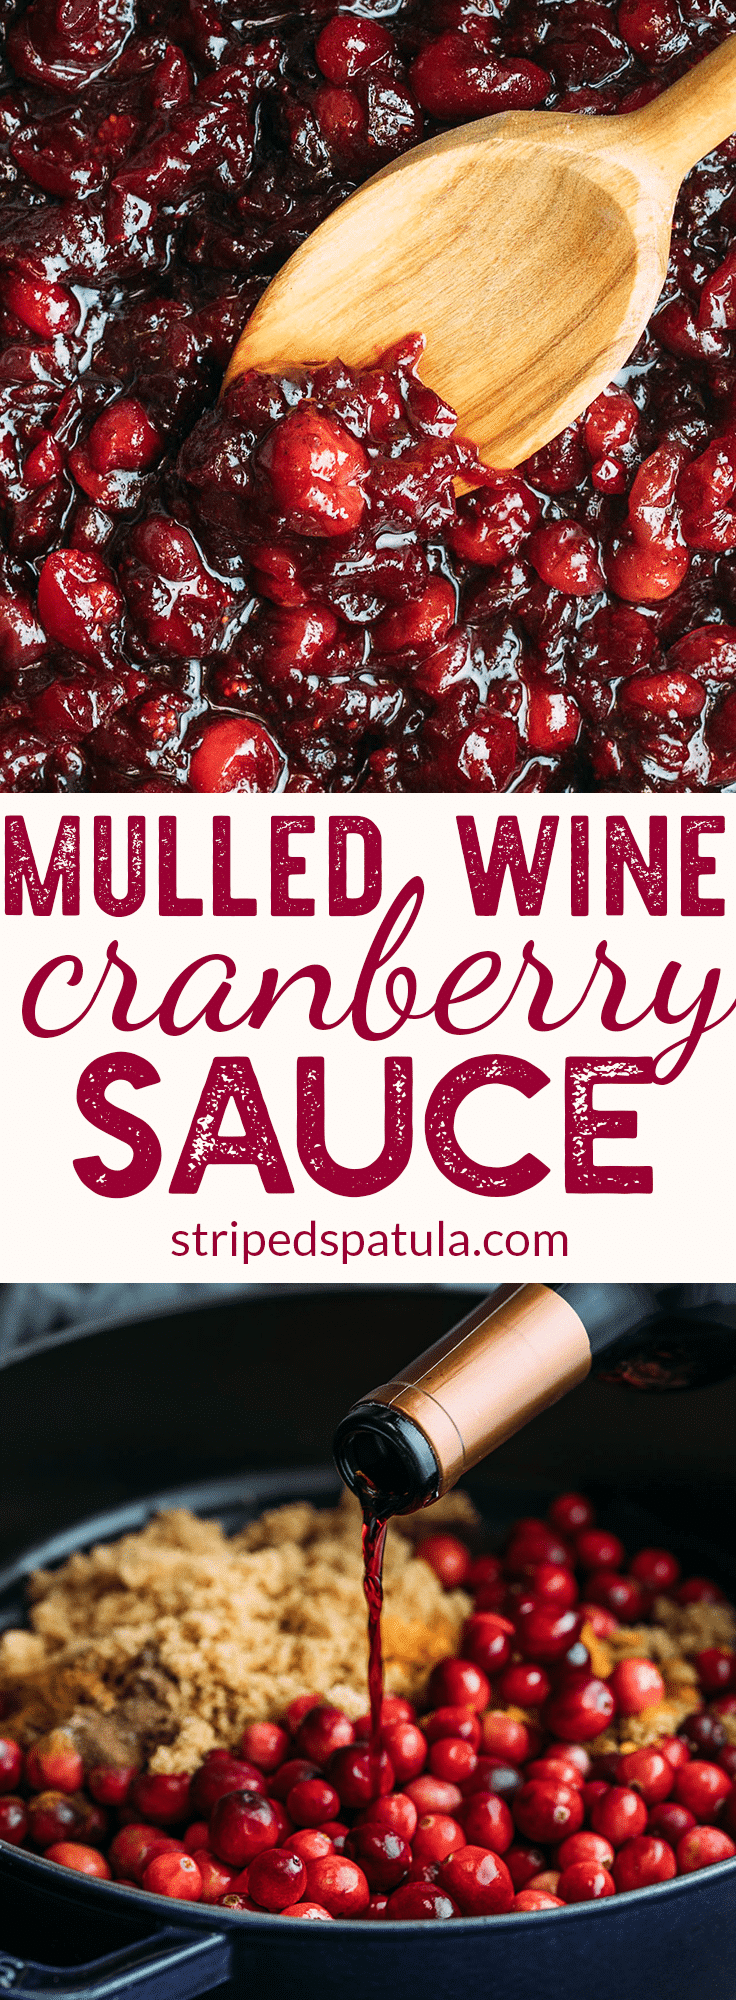 Mulled Wine Cranberry Sauce with Brandy | Striped Spatula